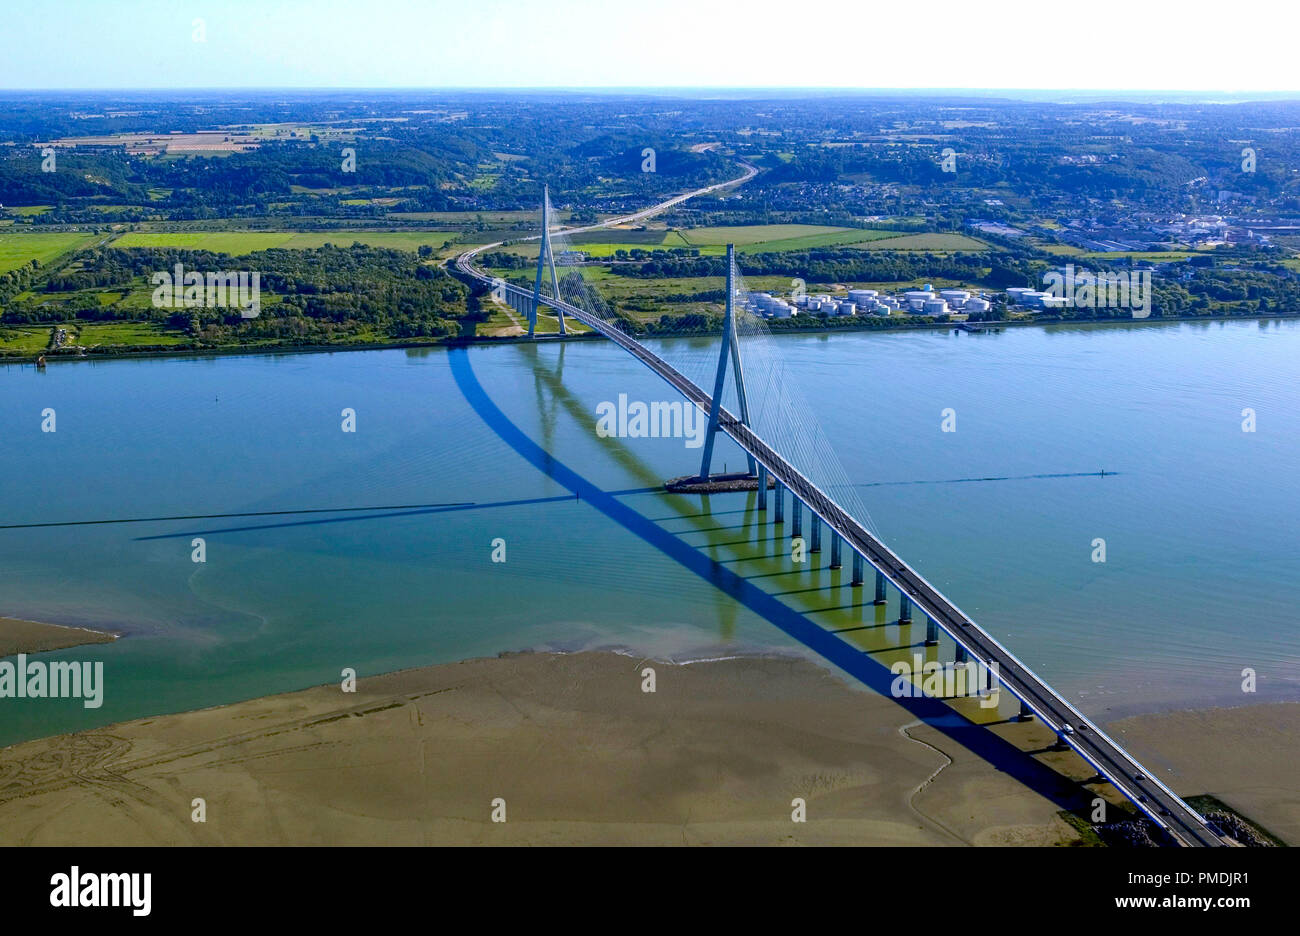 The Normandy Bridge ('pont de Normandie'), cable-stayed road bridge across the estuary of the River Seine linking Le Havre to Honfleur in Normandy. Stock Photo